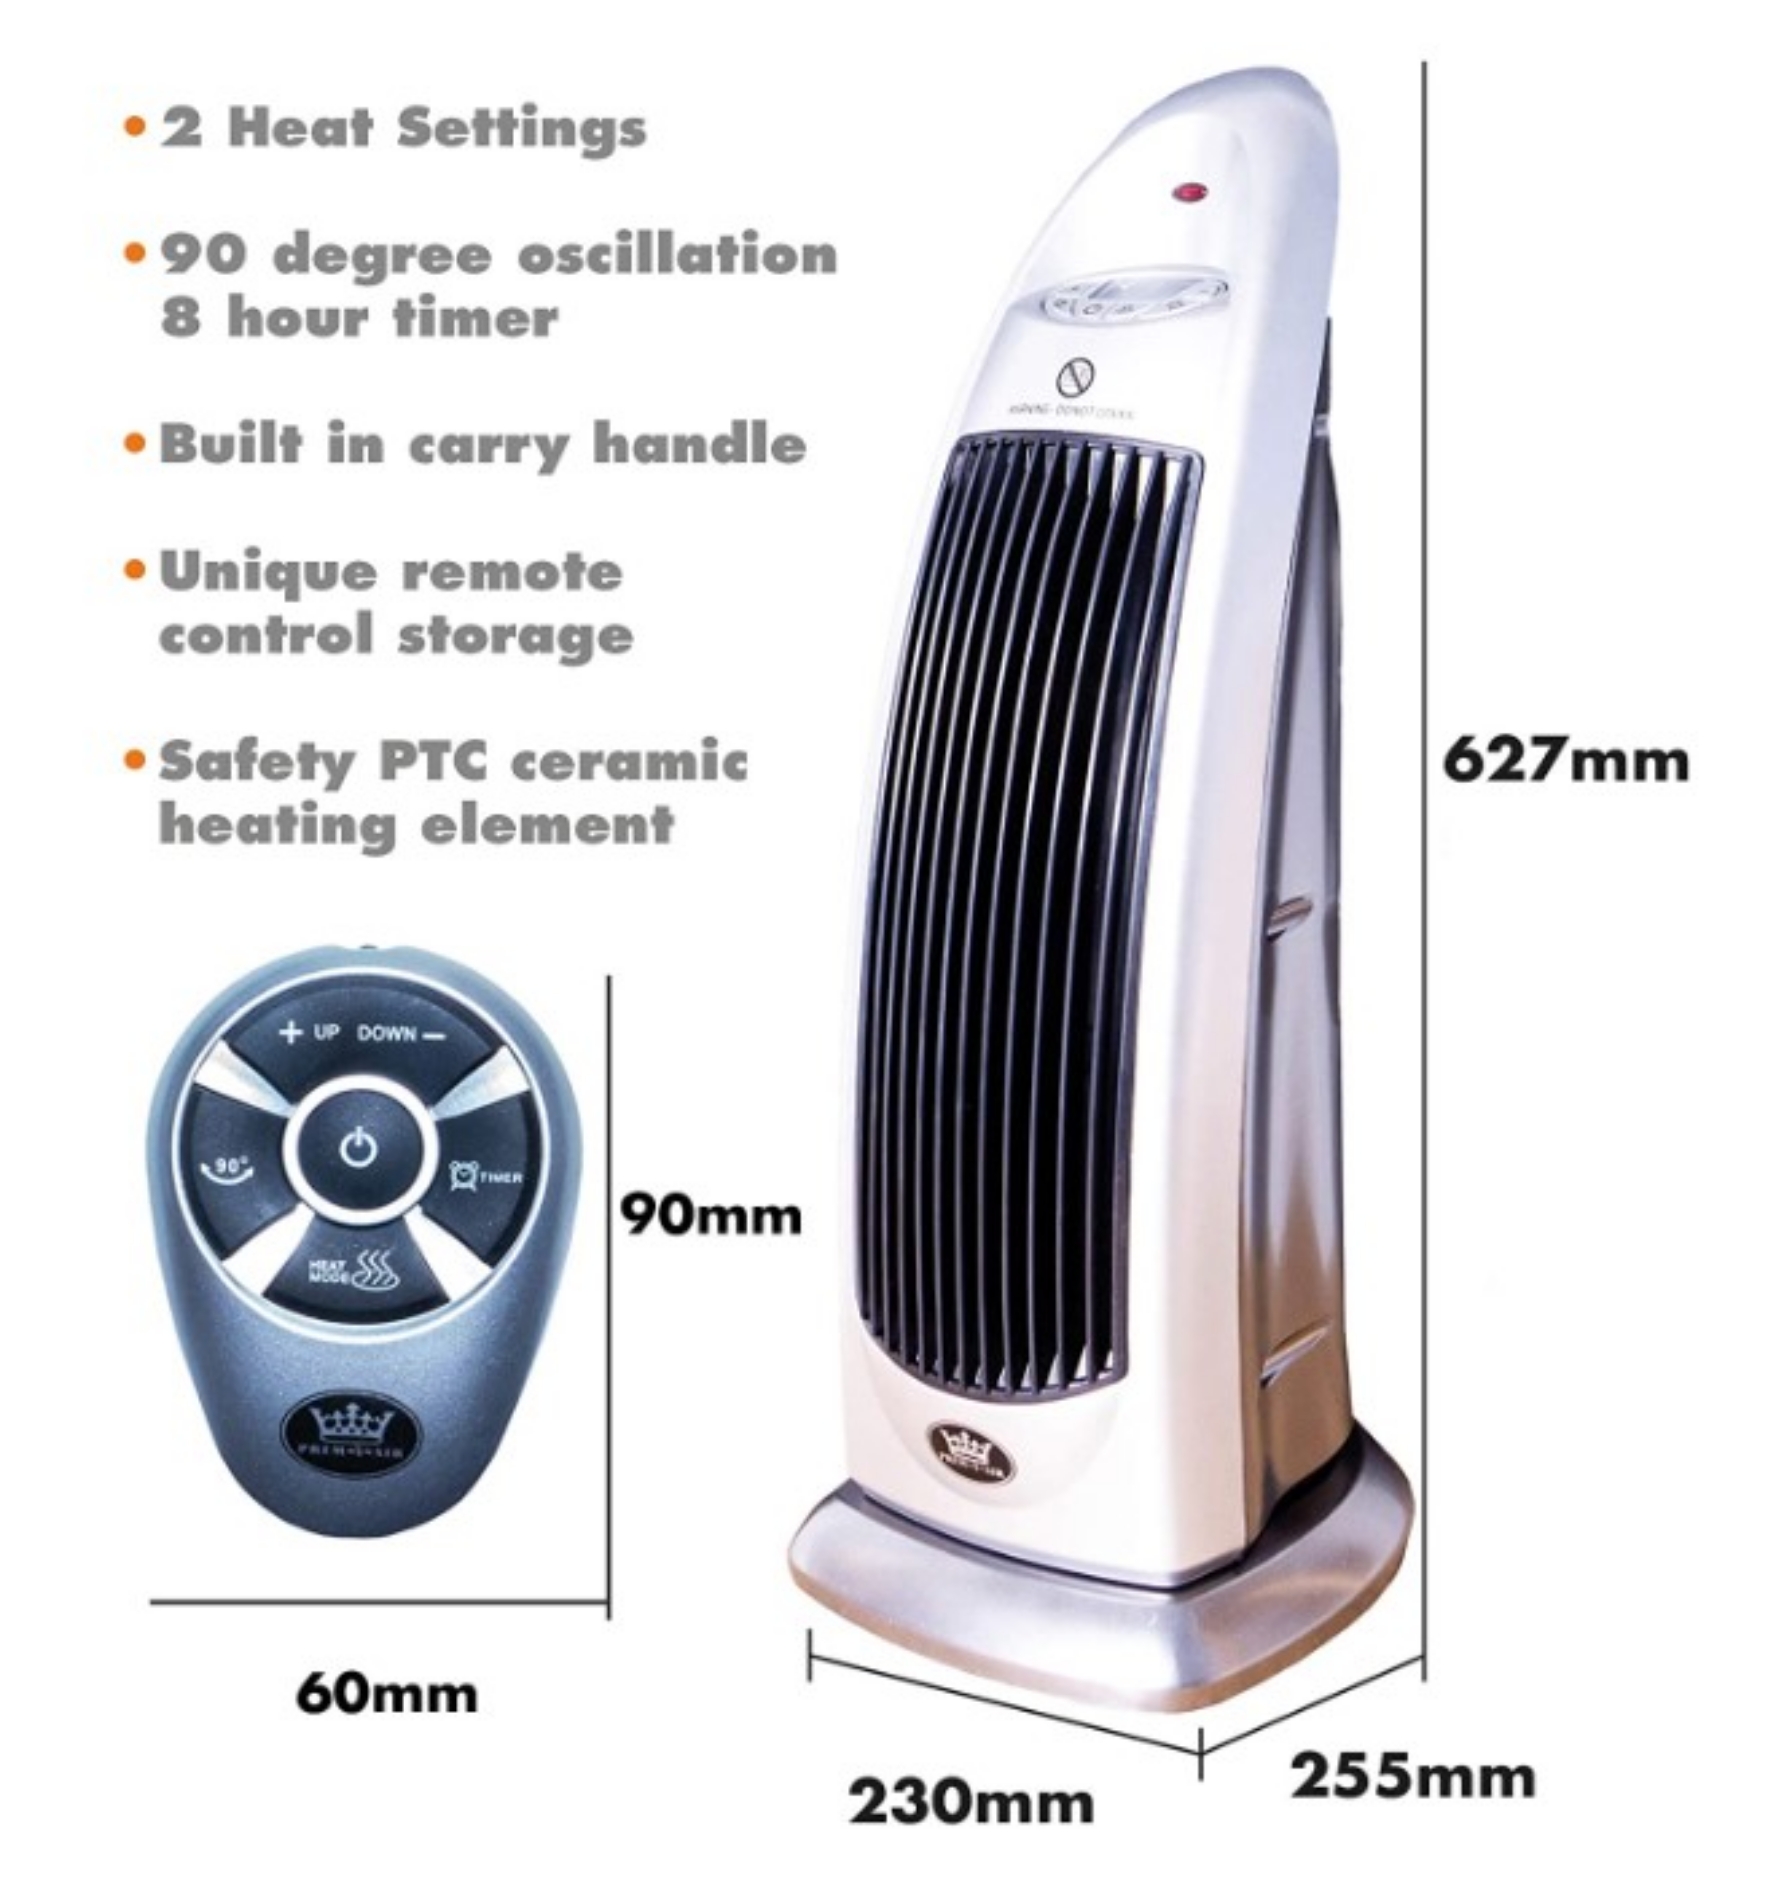 Prem-I-Air EH0240 1800W Oscillating Tower Fan and Heater Dimensions